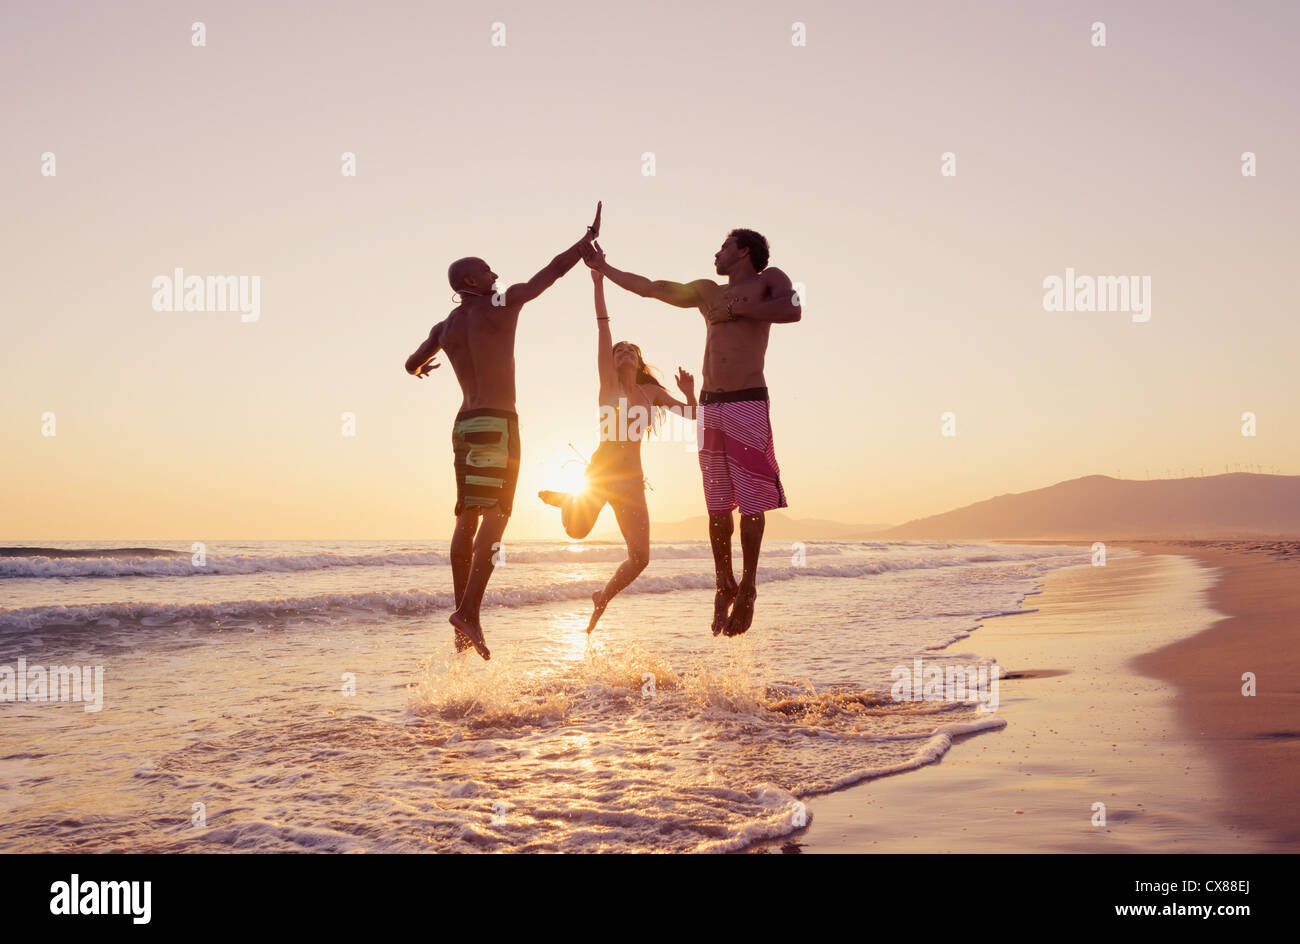 Three People Leaping In The Air To Clap Hands Together On A Beach At Sunset; Tarifa, Cadiz, Andalusia, Spain Stock Photo